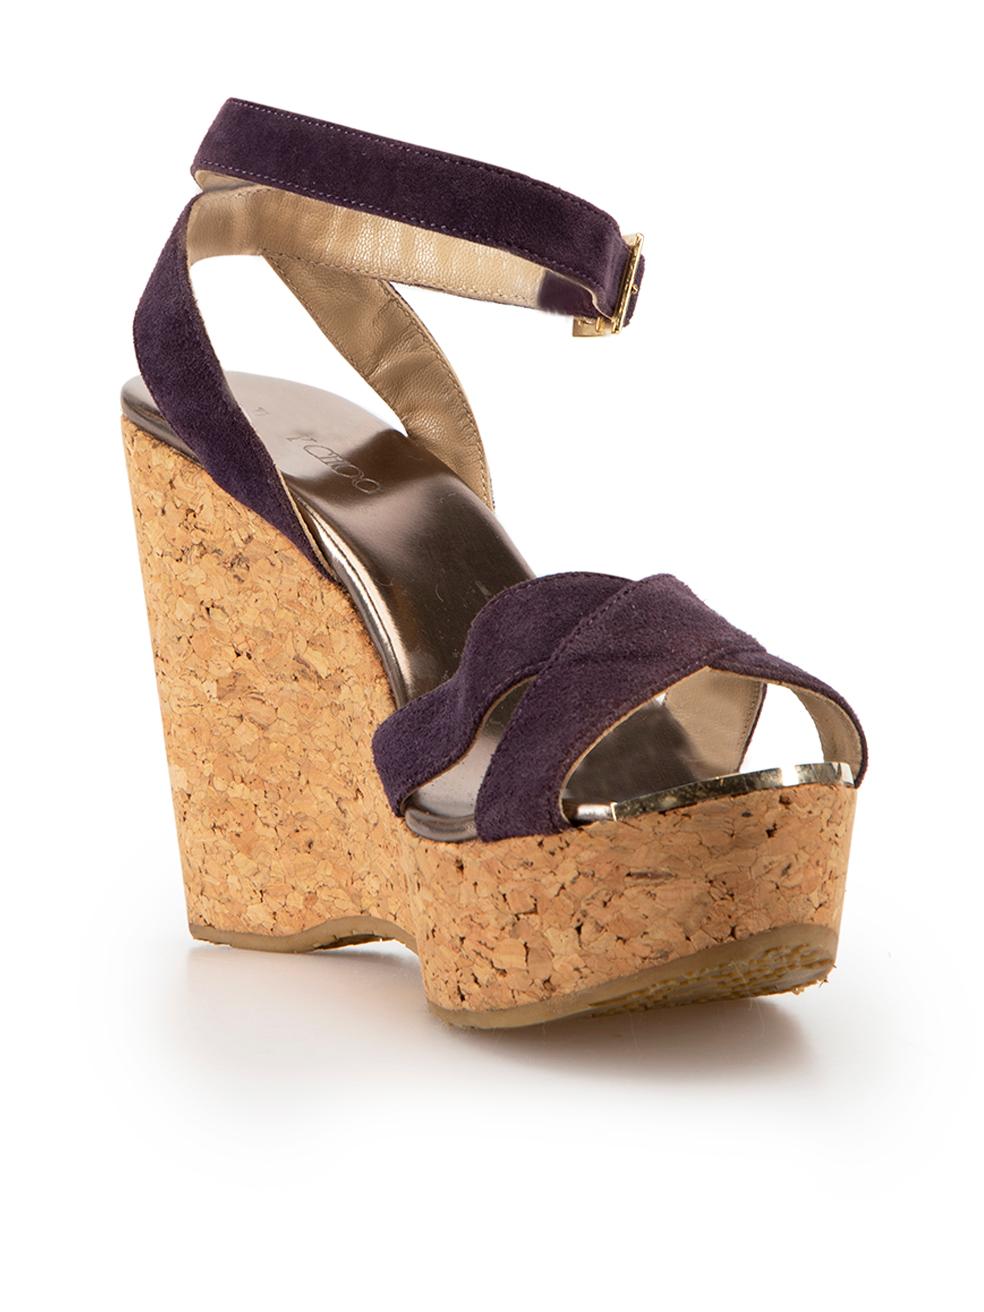 CONDITION is Good. Minor wear to wedge sandals is evident. Light scuffing to suede on straps on this used Jimmy Choo designer resale item.



Details


Purple

Suede

Wedge sandals

Cork wedge

Platform

Open-toe

Wrap around ankle strap



 

Made